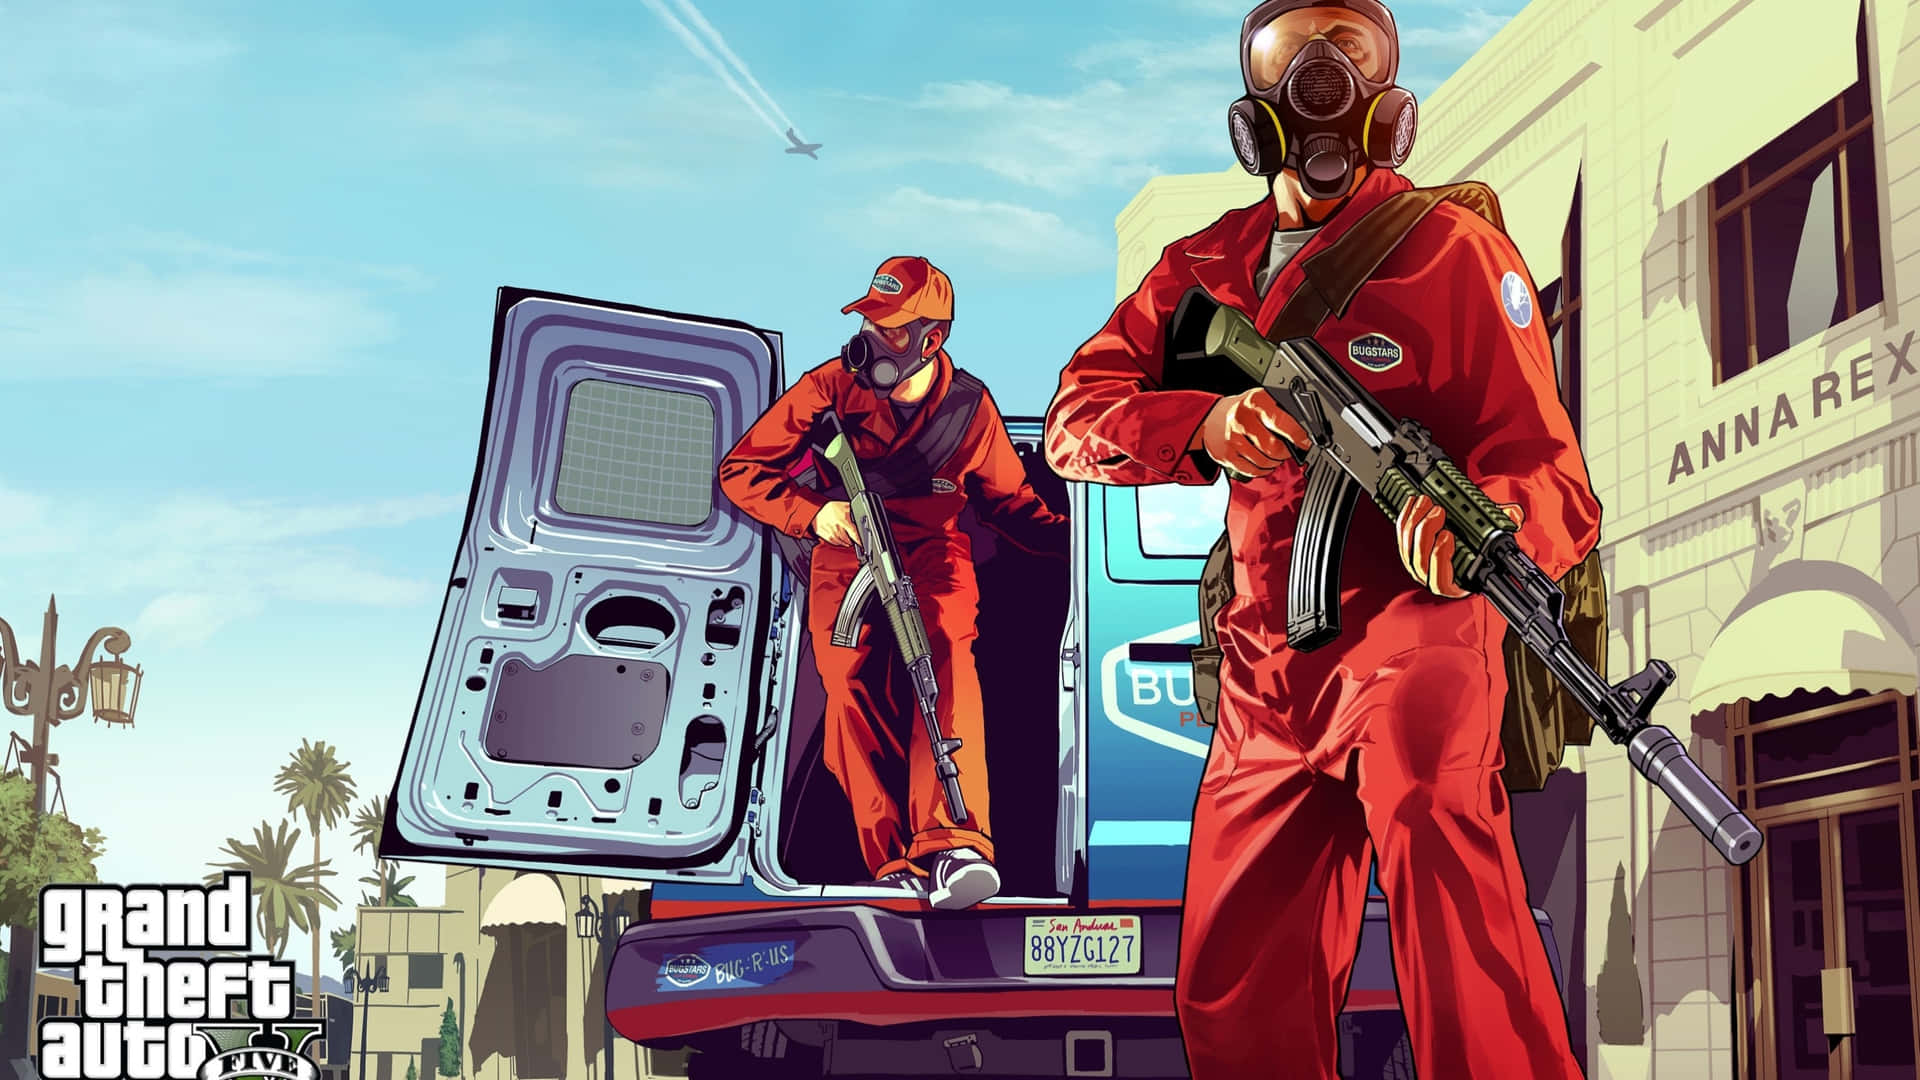 Explore the city of Los Santos and experience the thrill of Grand Theft Auto 5. Wallpaper